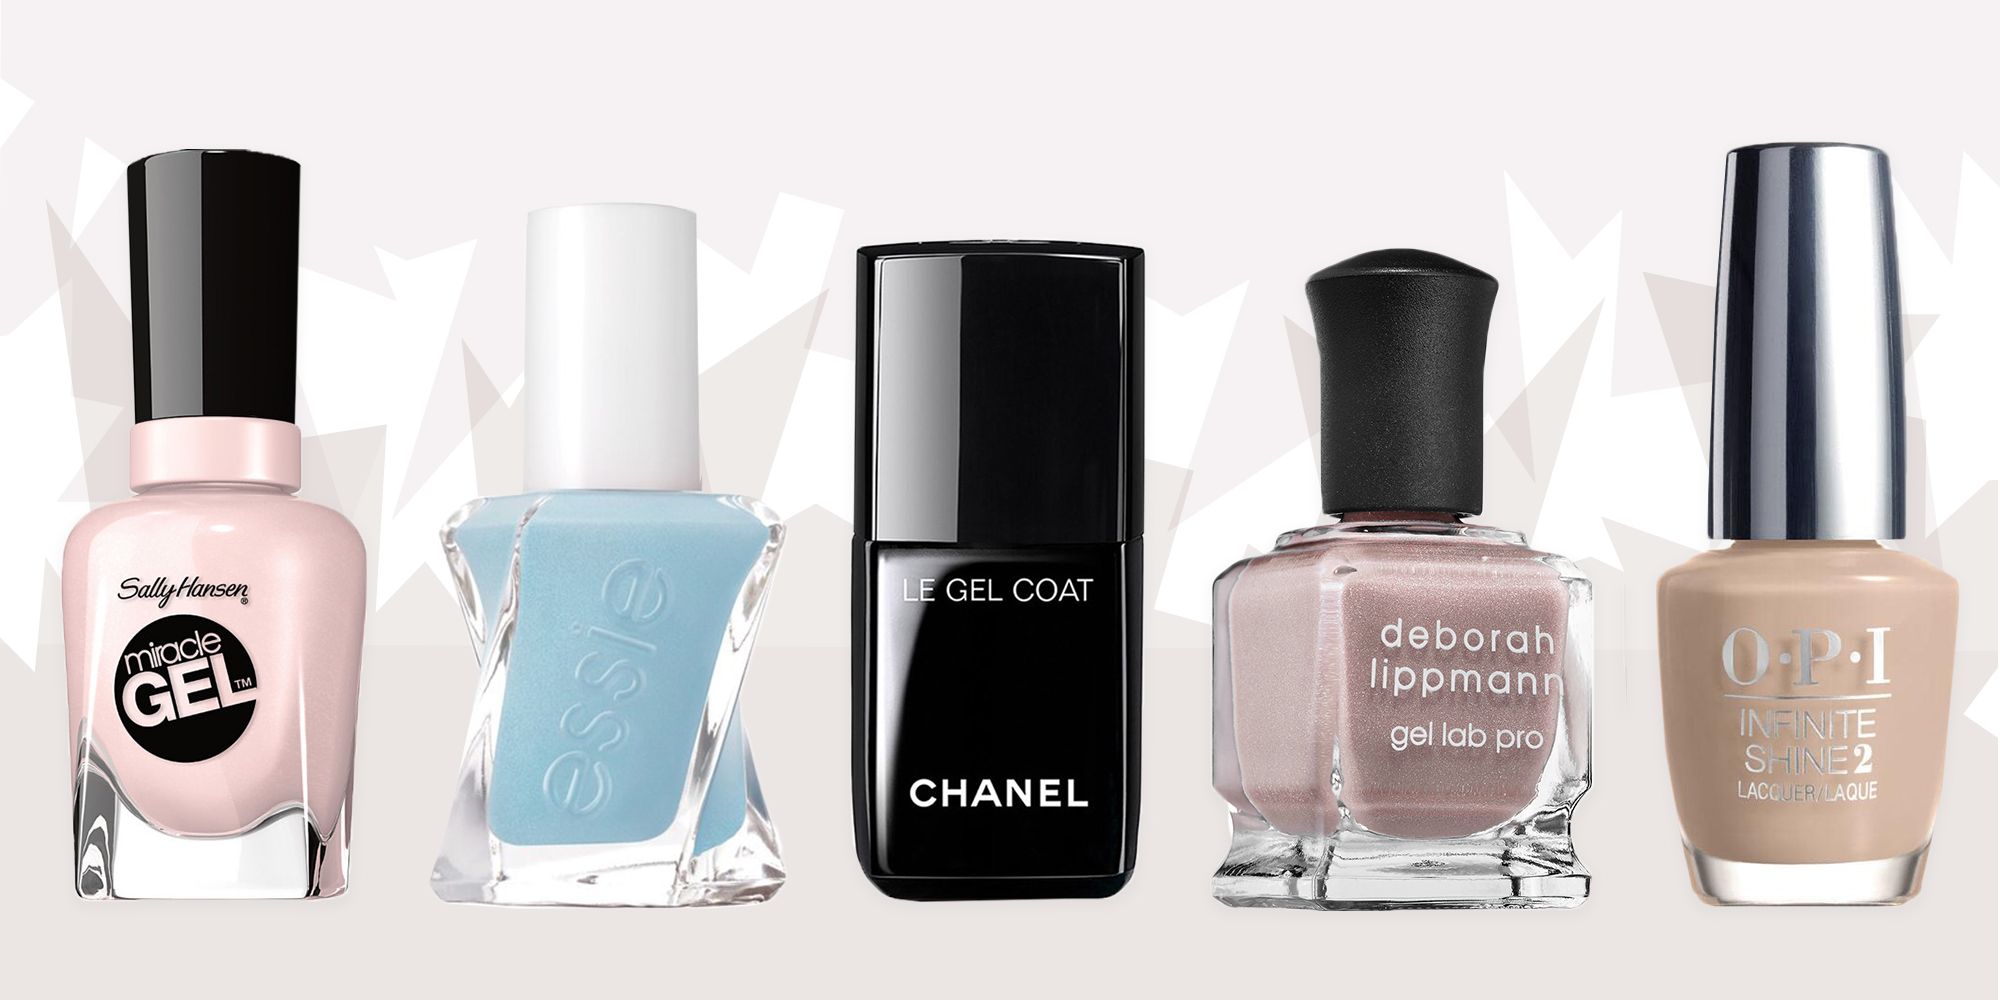 8 Best Gel Nail Polishes for 2018 - No Chip Gel Polish Colors & Brands